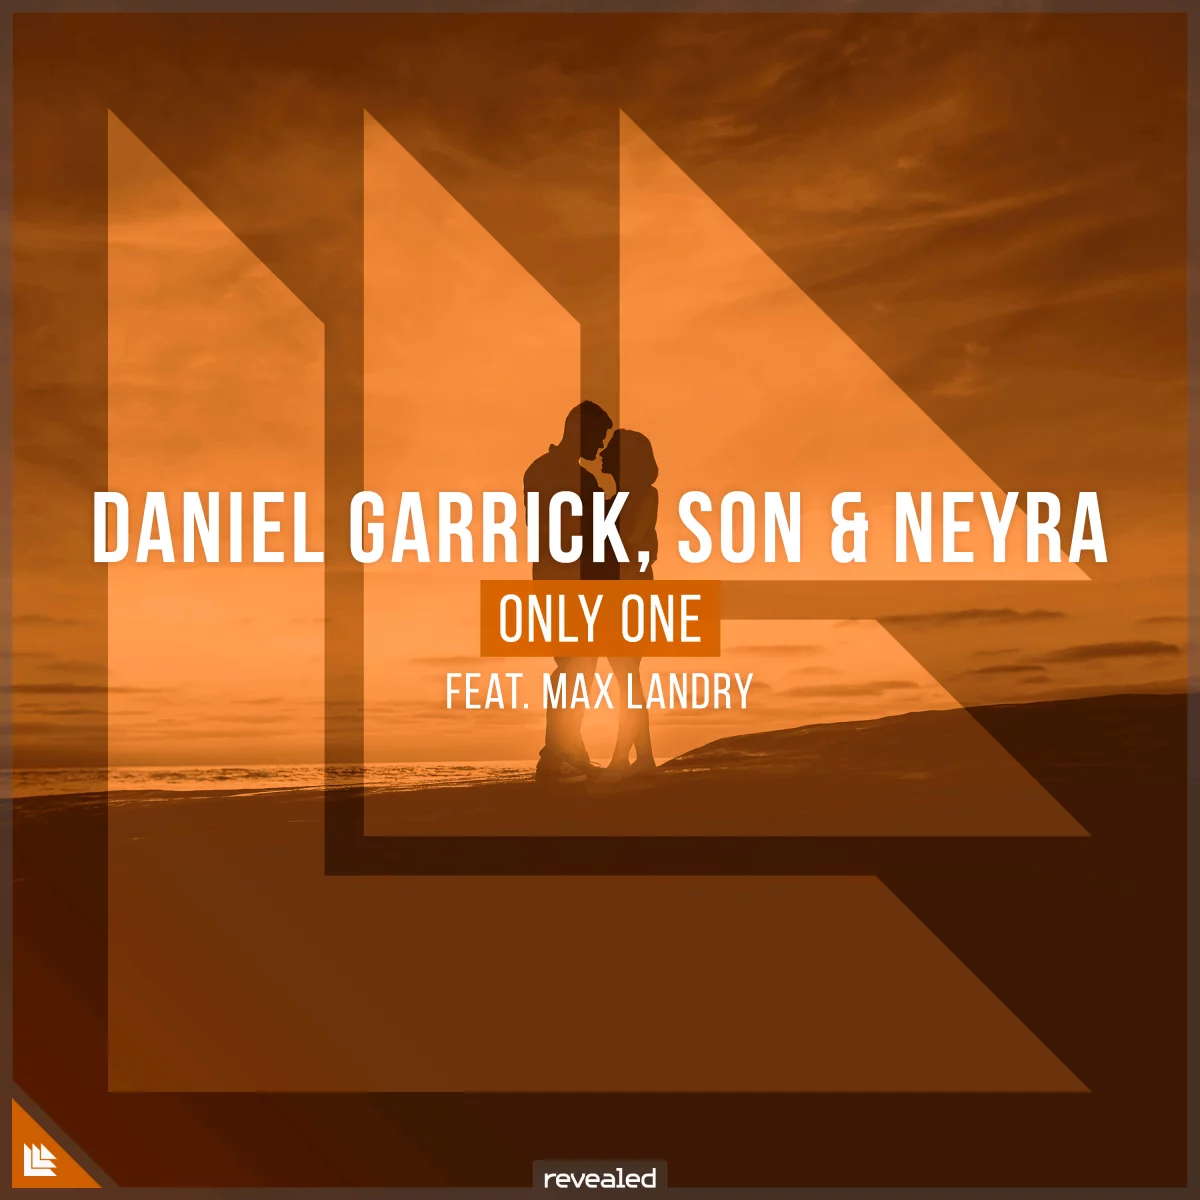 Only One - Daniel Garrick⁠ SON OFFICIAL⁠ ⁠ Neyra⁠ Max Landry Official⁠ 